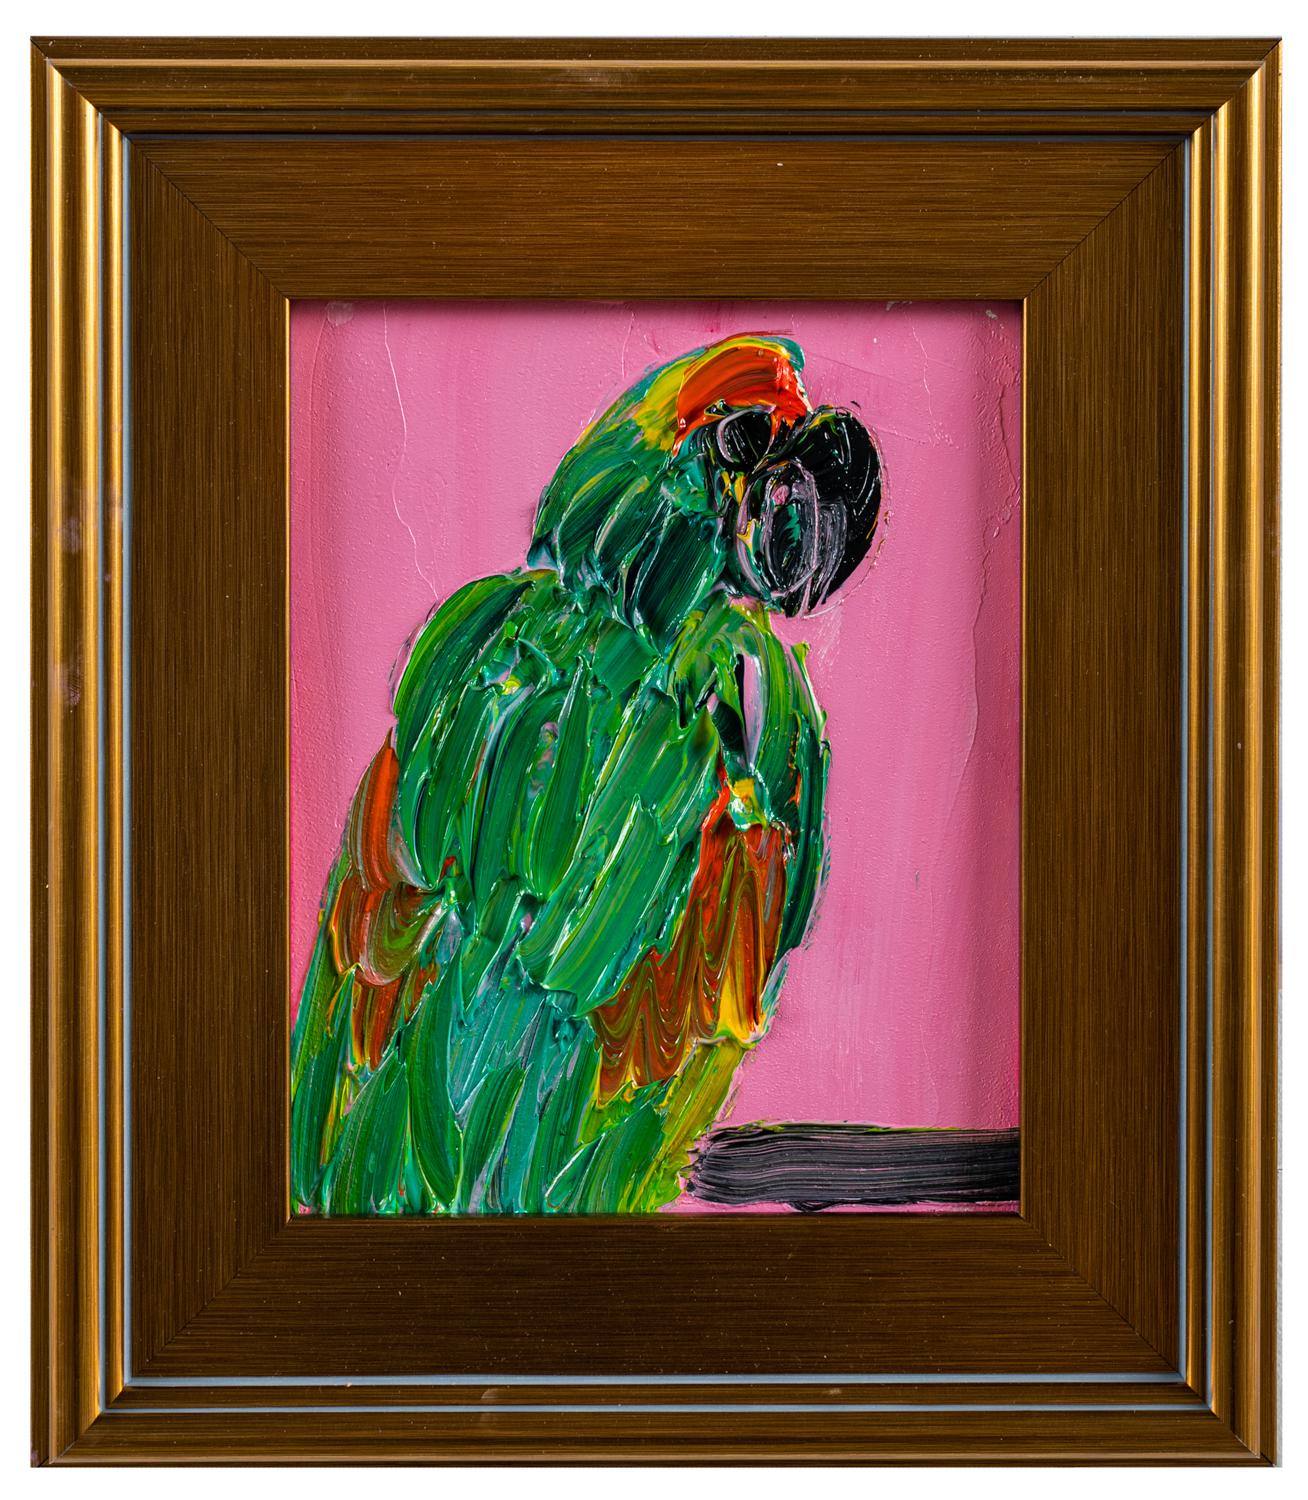 Available at Madelyn Jordon Fine Art. 'Now and Again' by Hunt Slonem, 2023.  Oil on wood, 10 x 8 in. / Frame: 15 x 13 in. This painting features a charming portrait of a parrot. The parrot is painted in green, orange and black on a hot pink